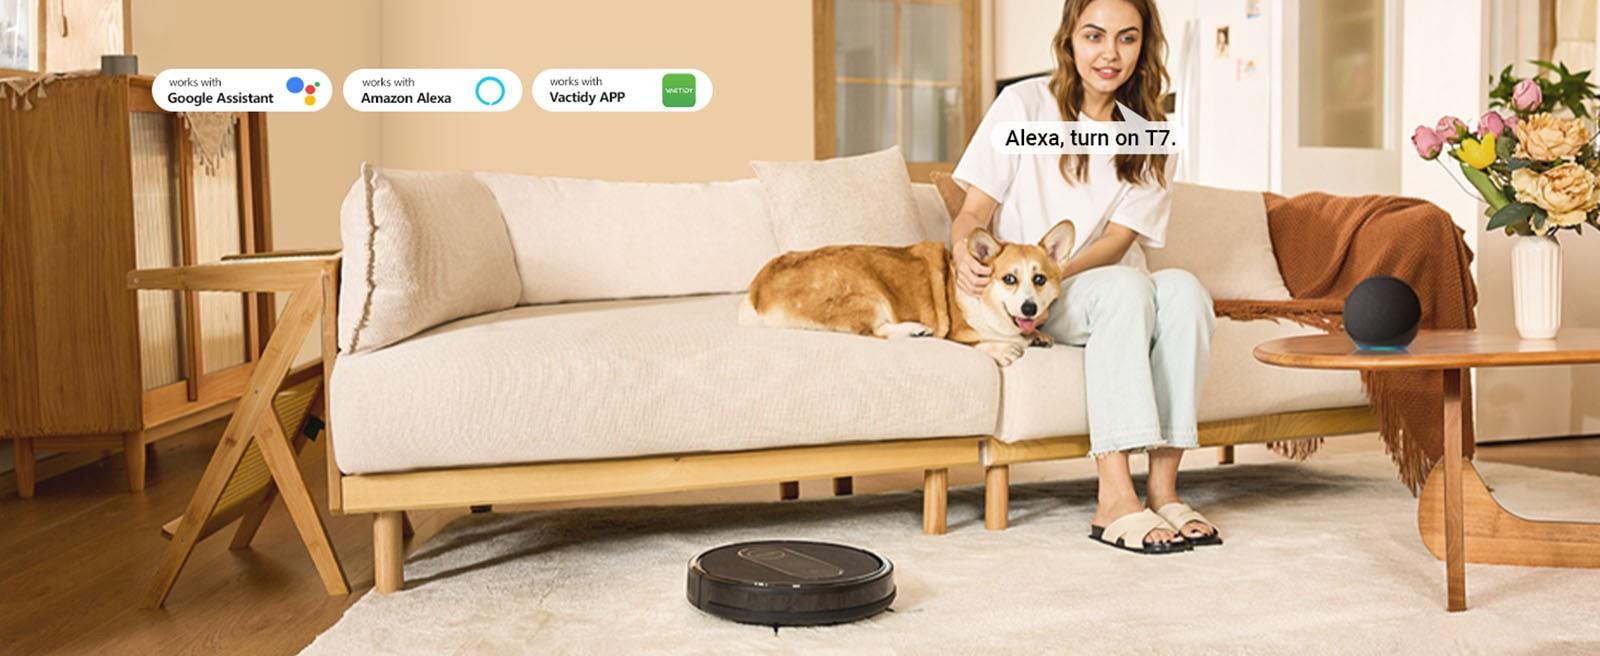 Vactidy T7 Robot Vacuum Cleaner, 2 in 1 Mopping Vacuum, 2800Pa Suction, 250ml Dust Bin, Carpet Detection, App Control